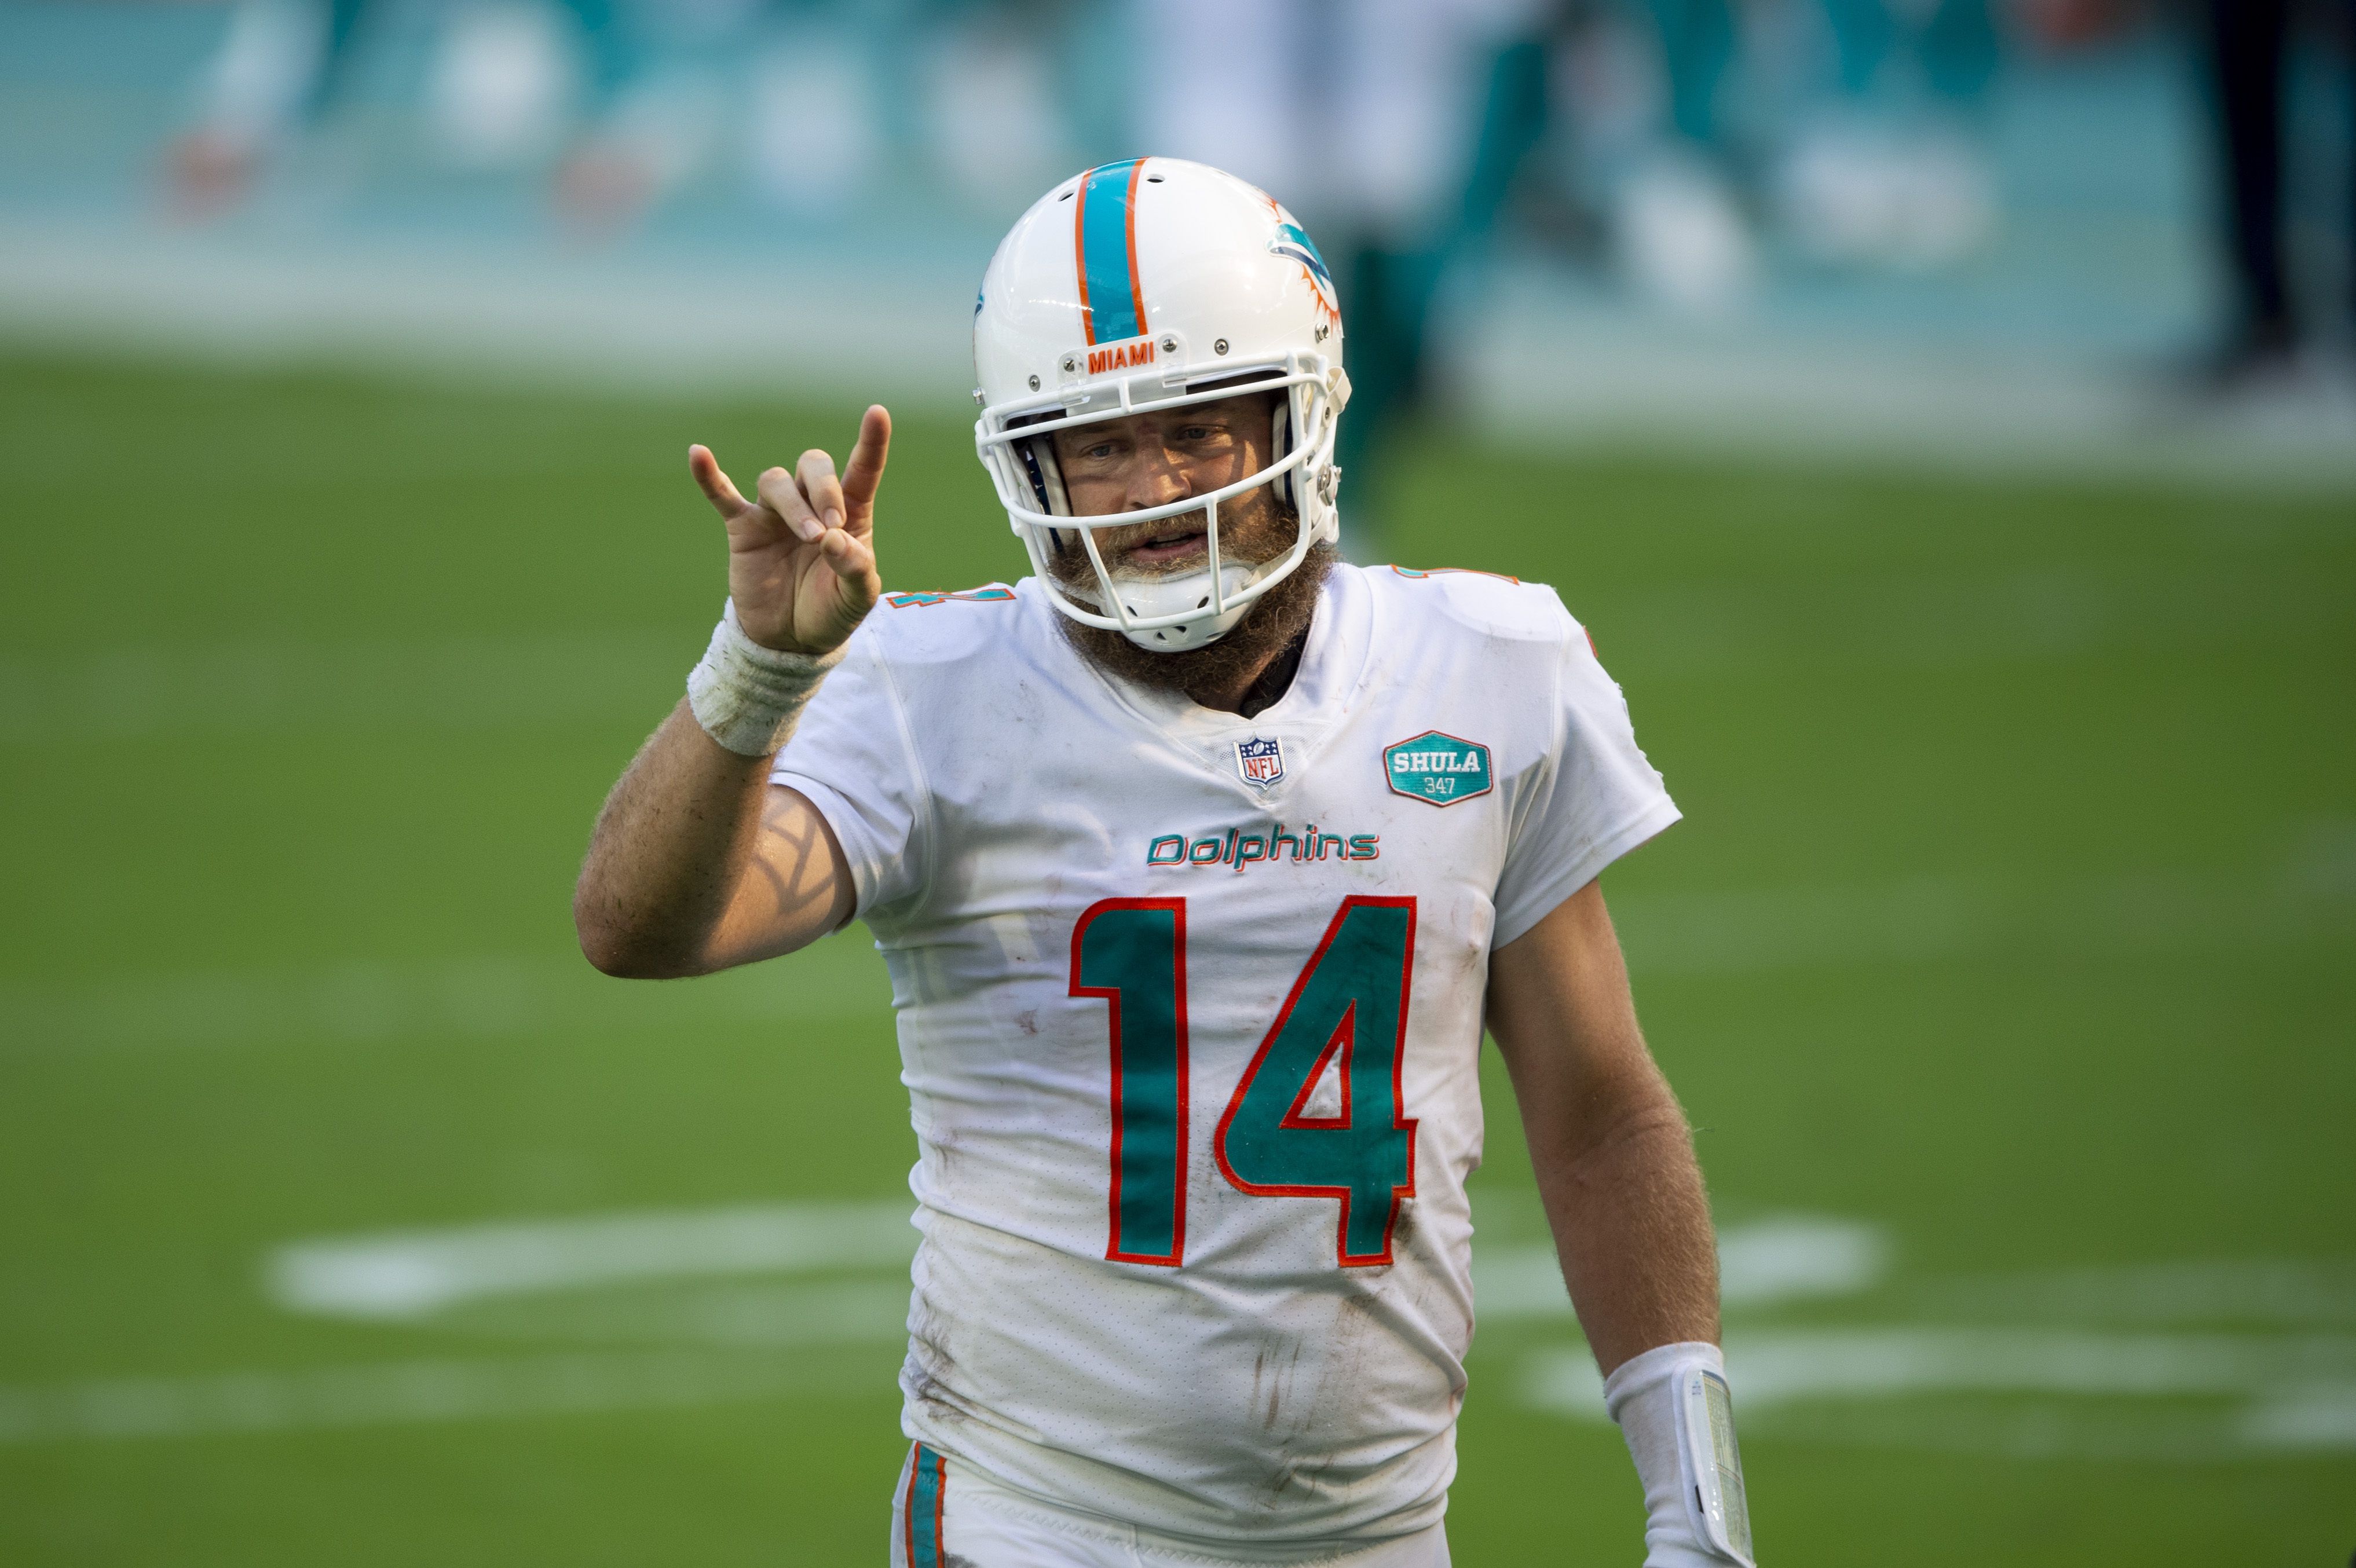 Sunday Night Football: How to watch the Miami Dolphins vs. New